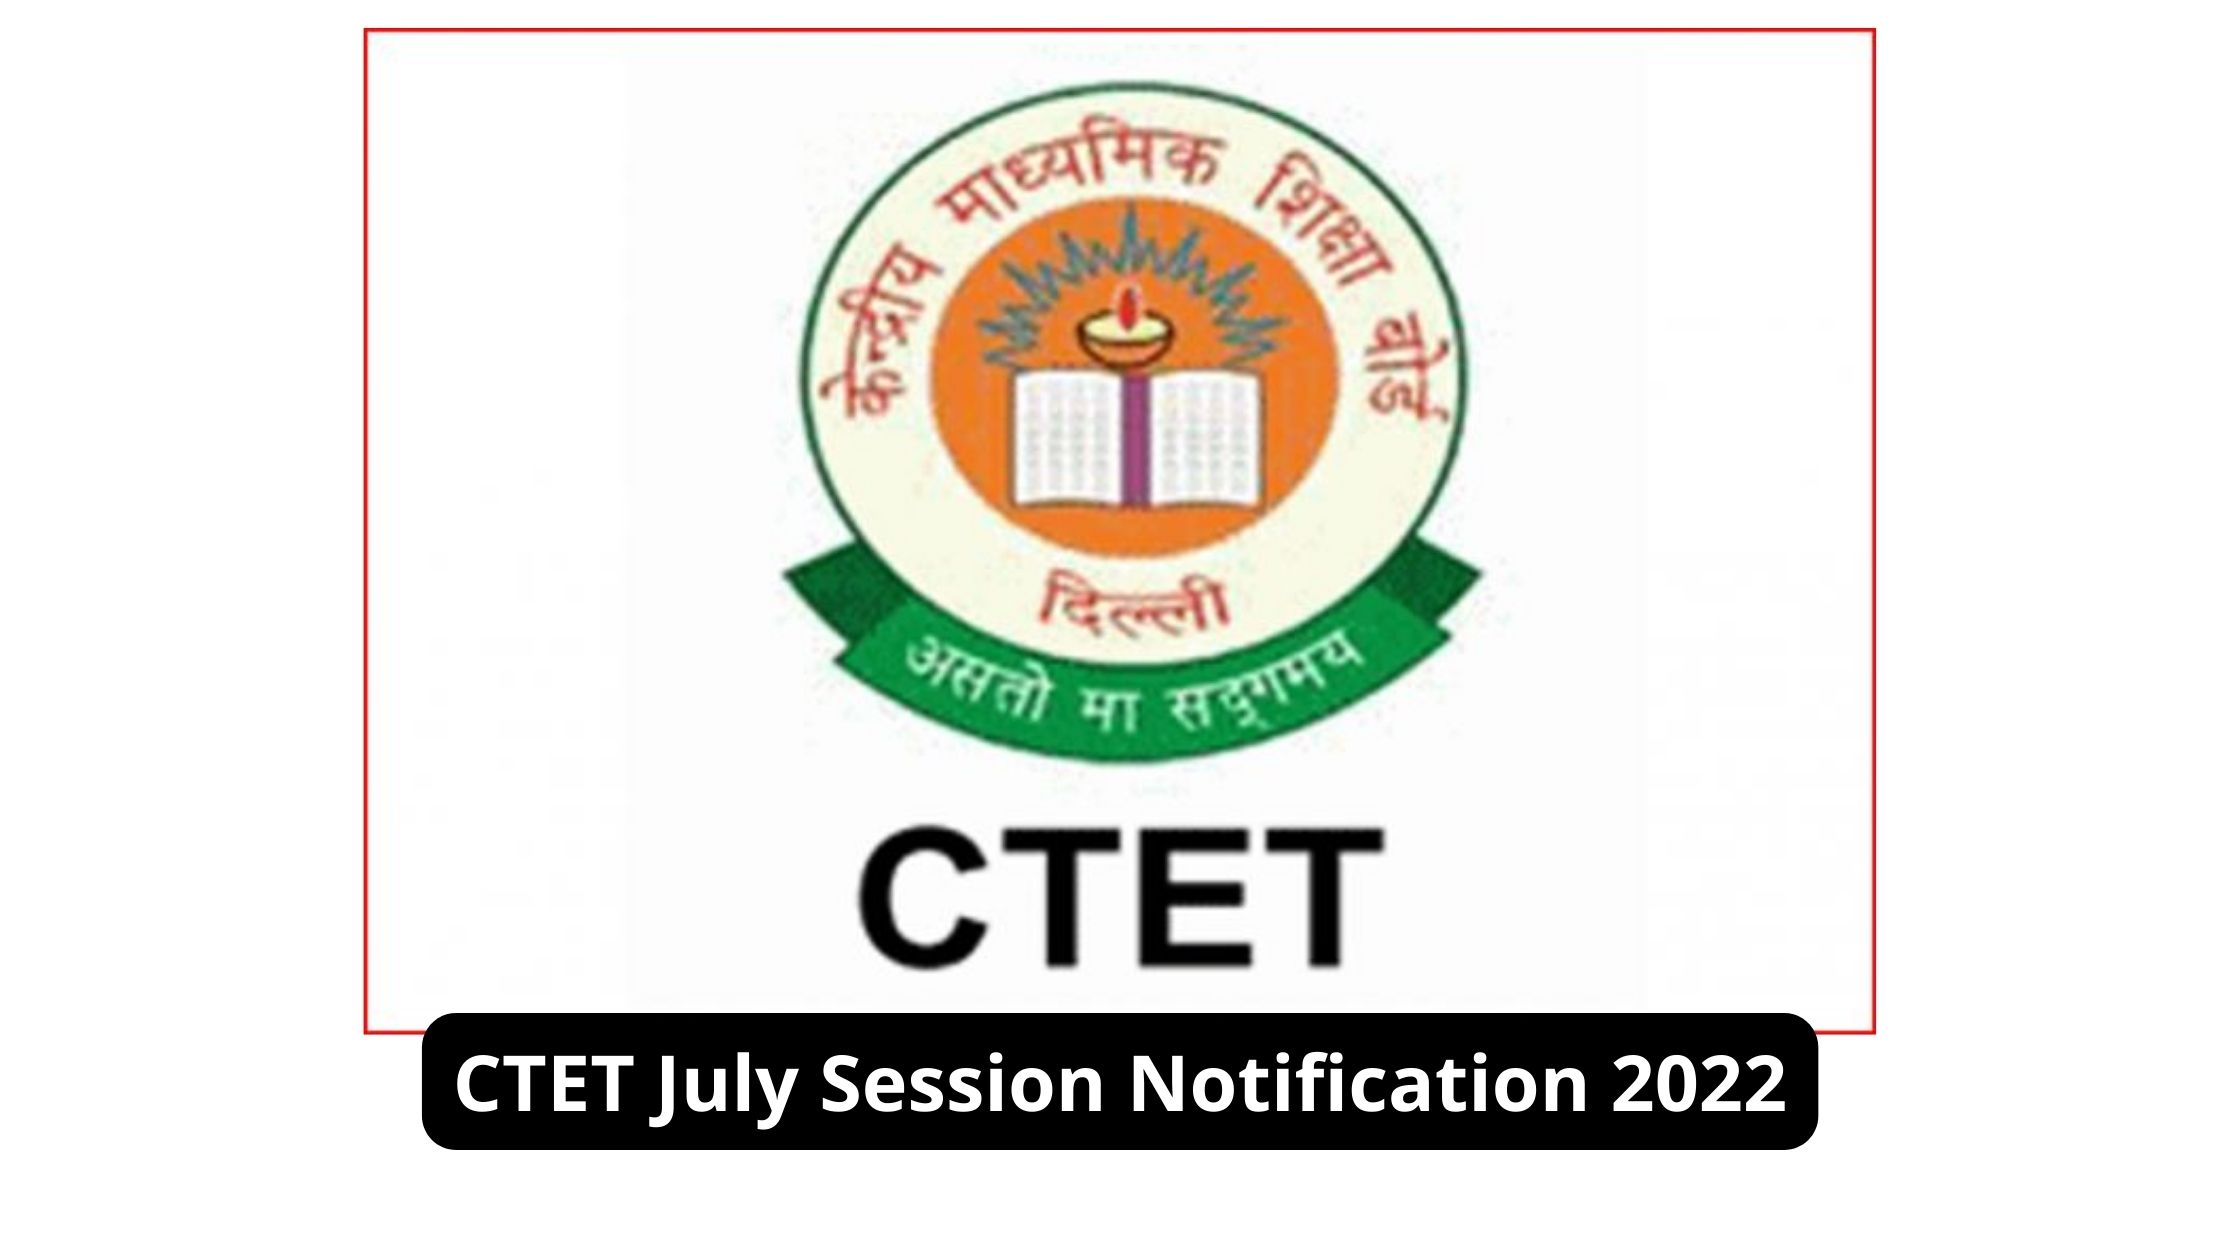 CTET July Session Notification 2022